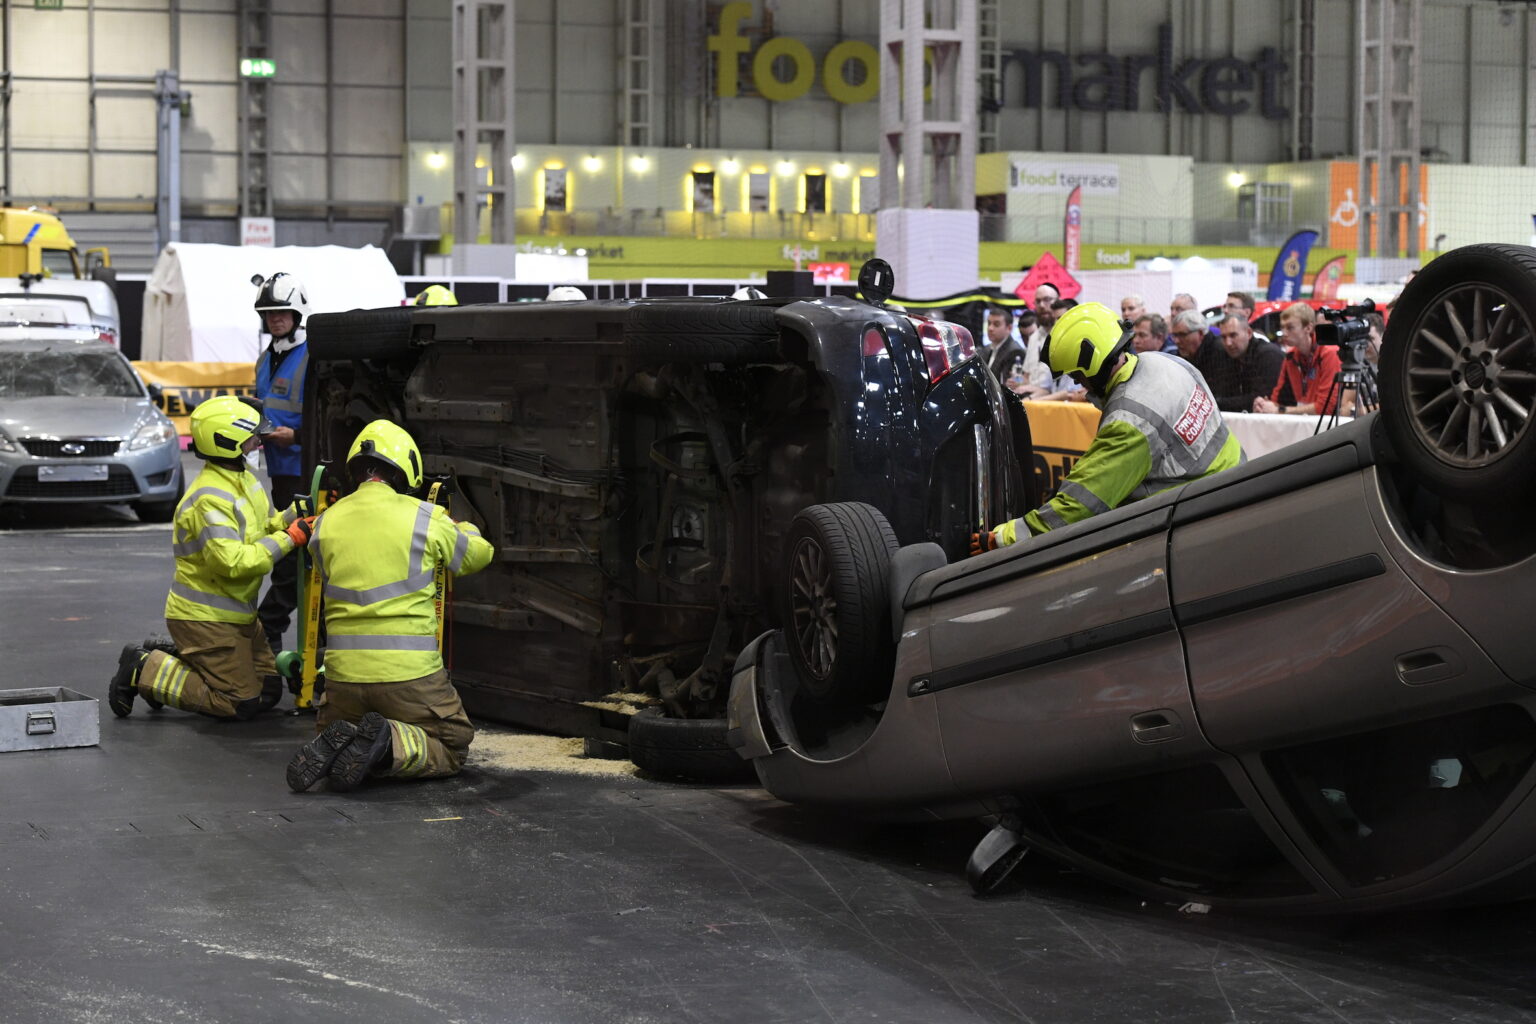 West Midlands Fire & Rescue Service will host The Extrication and Trauma Challenge at ESS2021